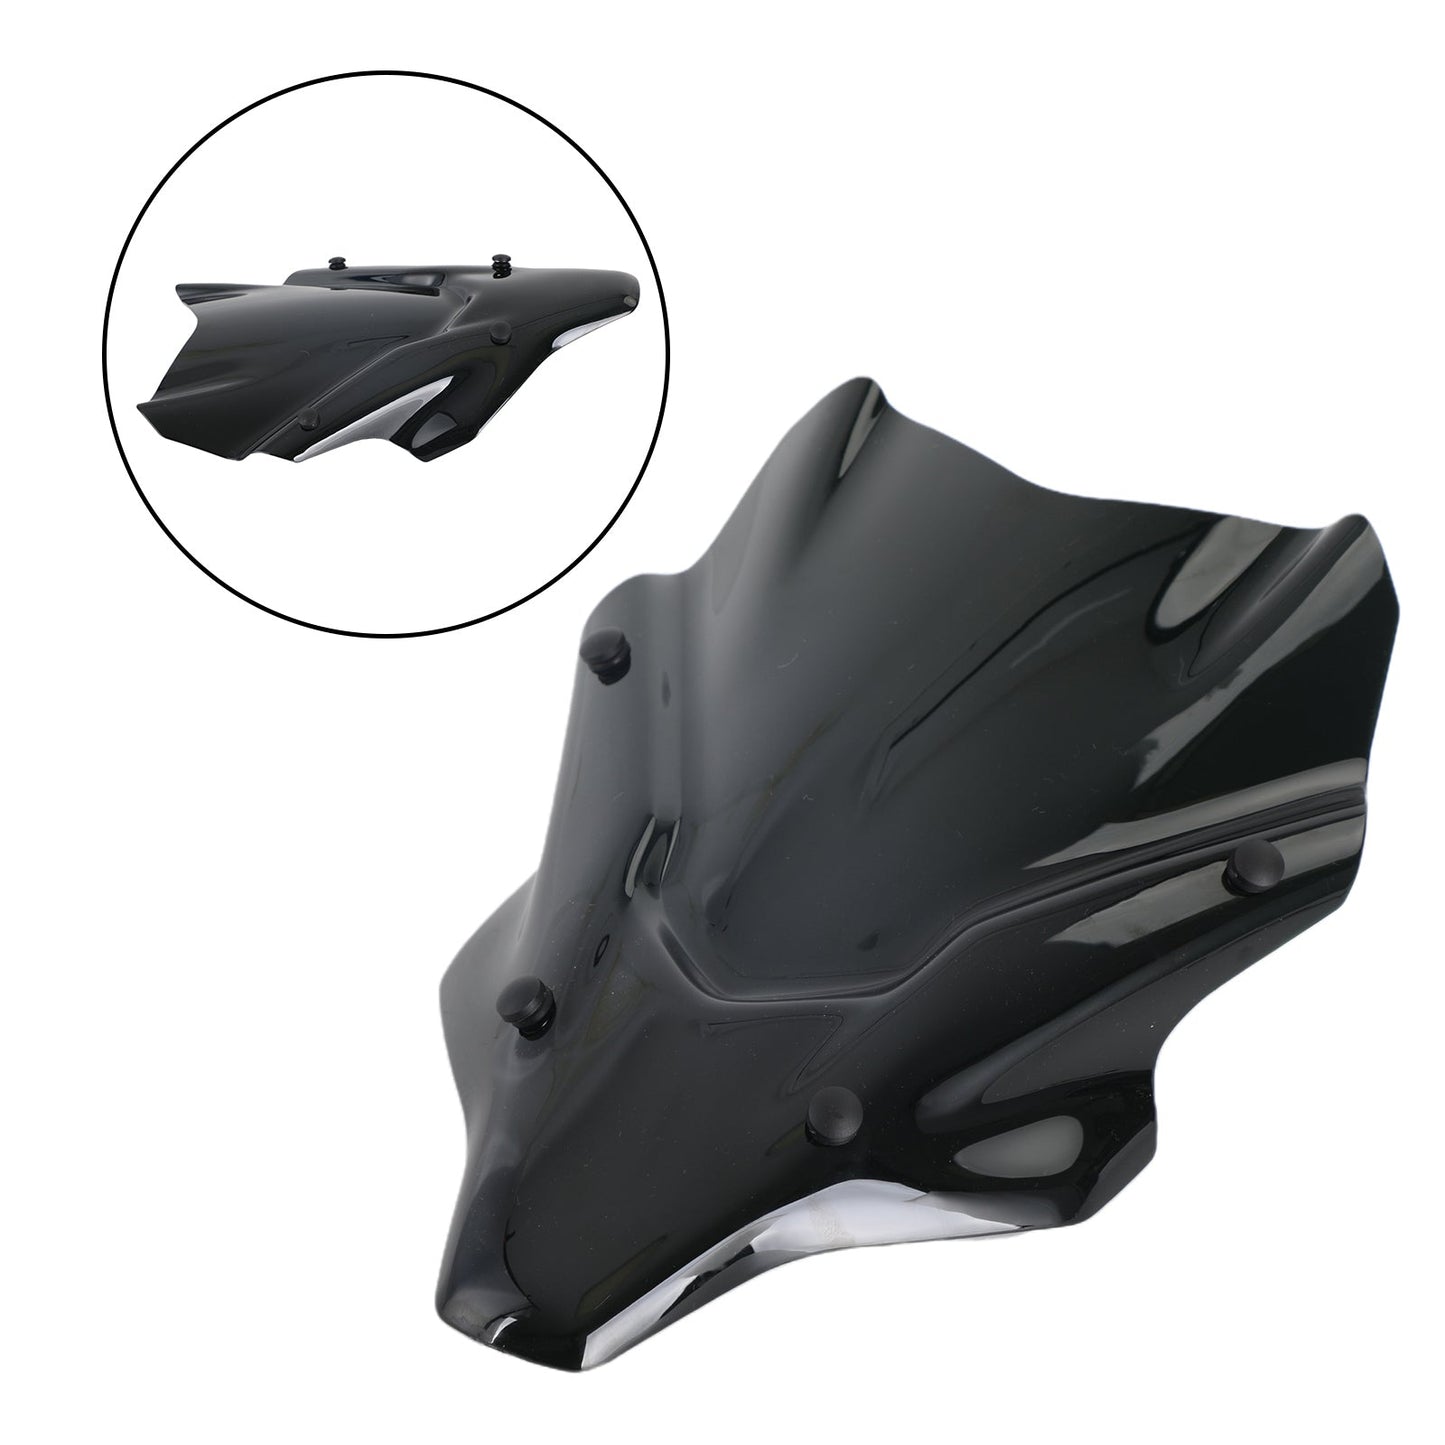 Windscreen Windshield Shield Protector fit for Yamaha MT-07 MT07 2021-2022